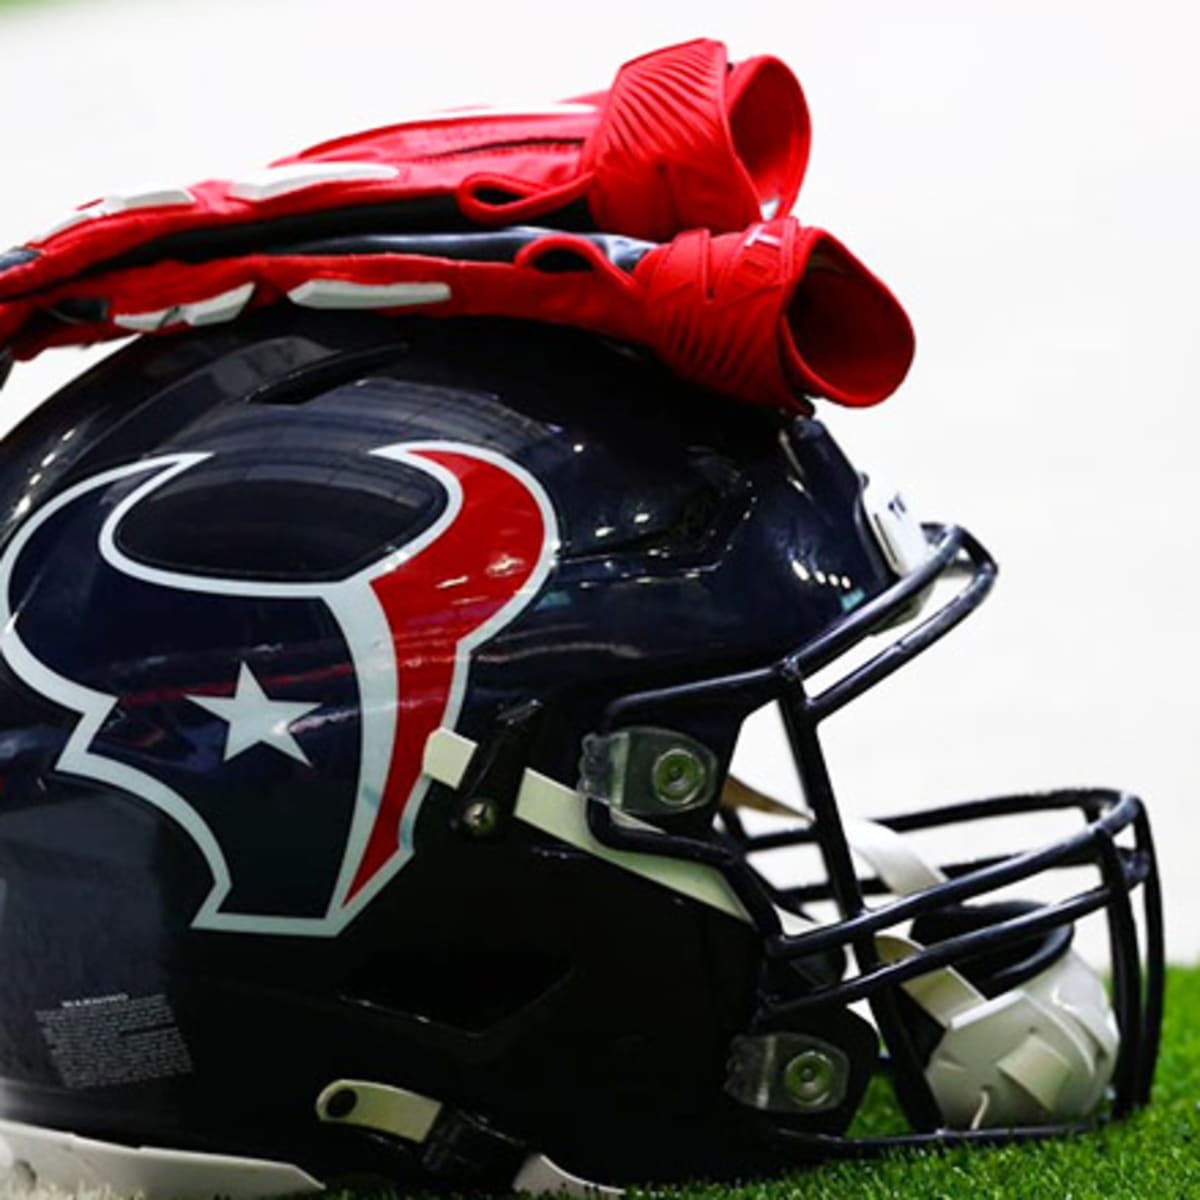 who does houston texans play next week